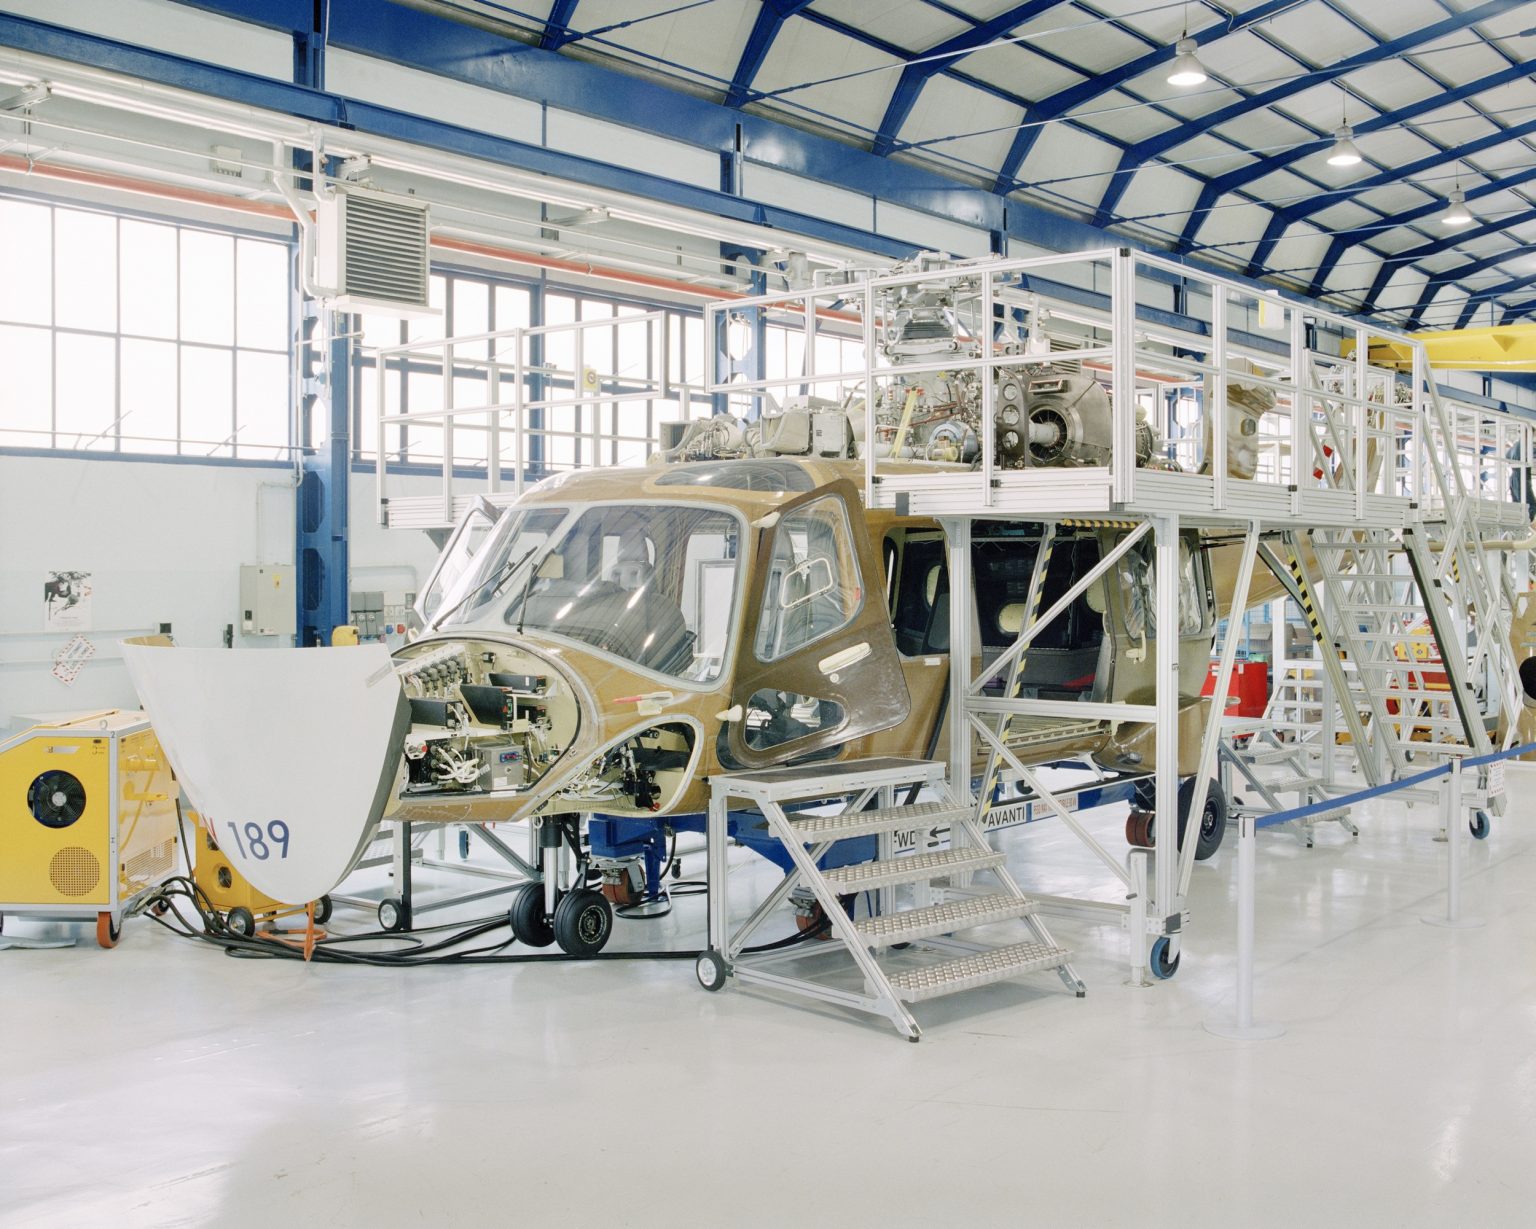 Leonardo, Vergiate (VA), 2017. Training Academy of Leonardo Finmeccanica helicopters. View of the AW189 helicopter inside the maintainence training simulator. ><

Leonardo, Vergiate (VA), 2017. Training Academy di Leonardo Finmeccanica divisione elicotteri. Elicottero AW189 allinterno del maintainence training simulator.